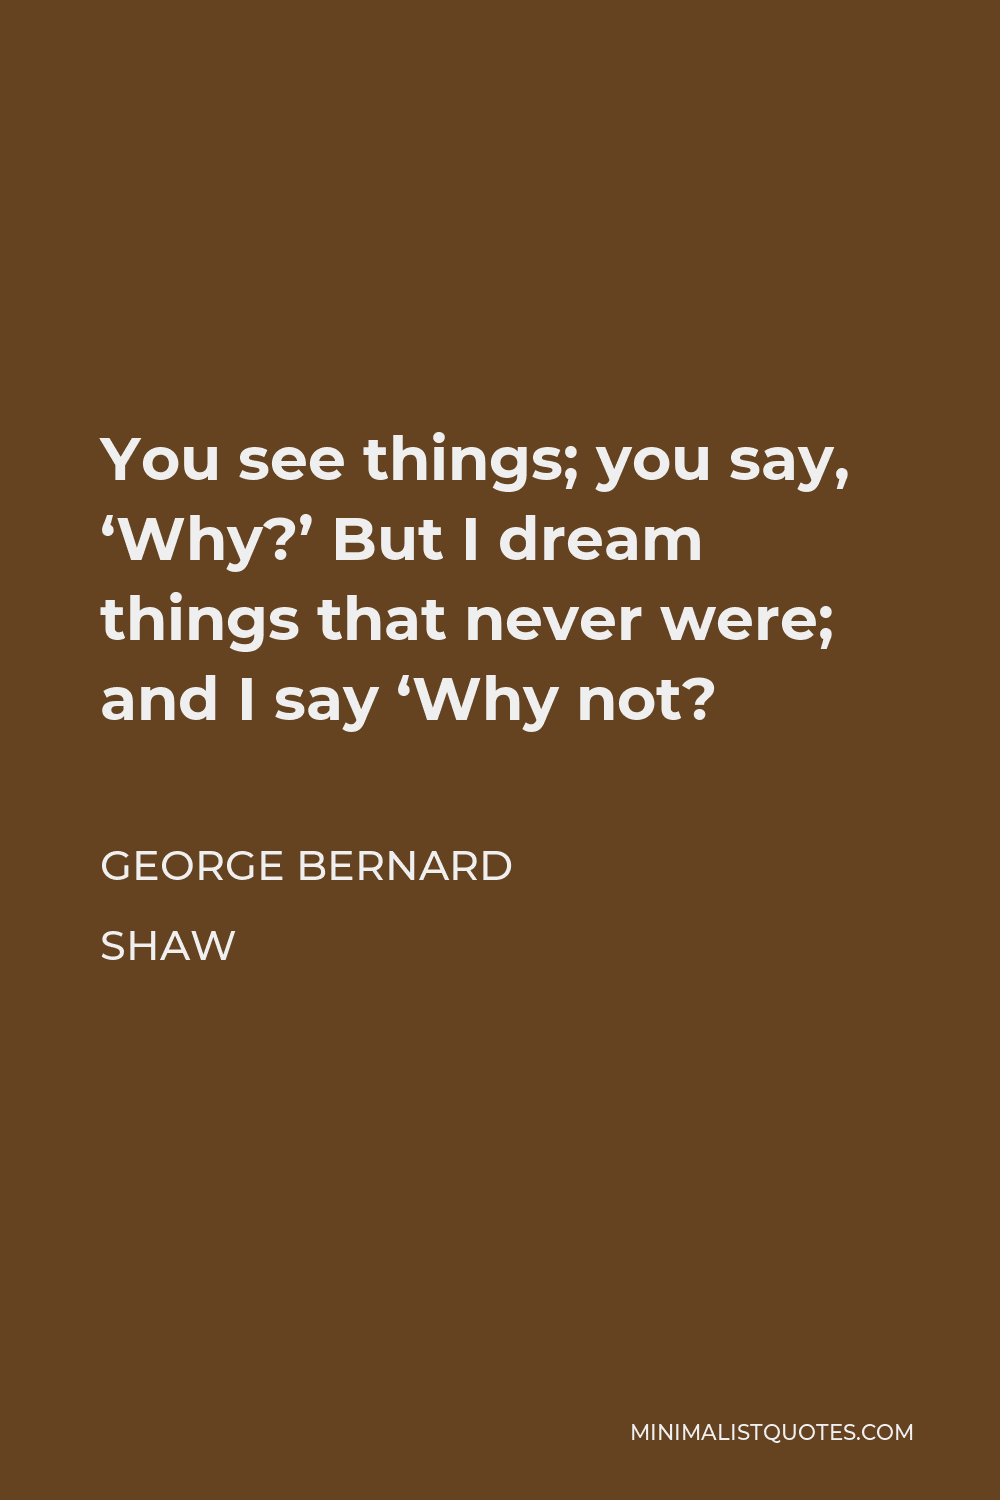 George Bernard Shaw Quote - You see things; you say, ‘Why?’ But I dream things that never were; and I say ‘Why not?